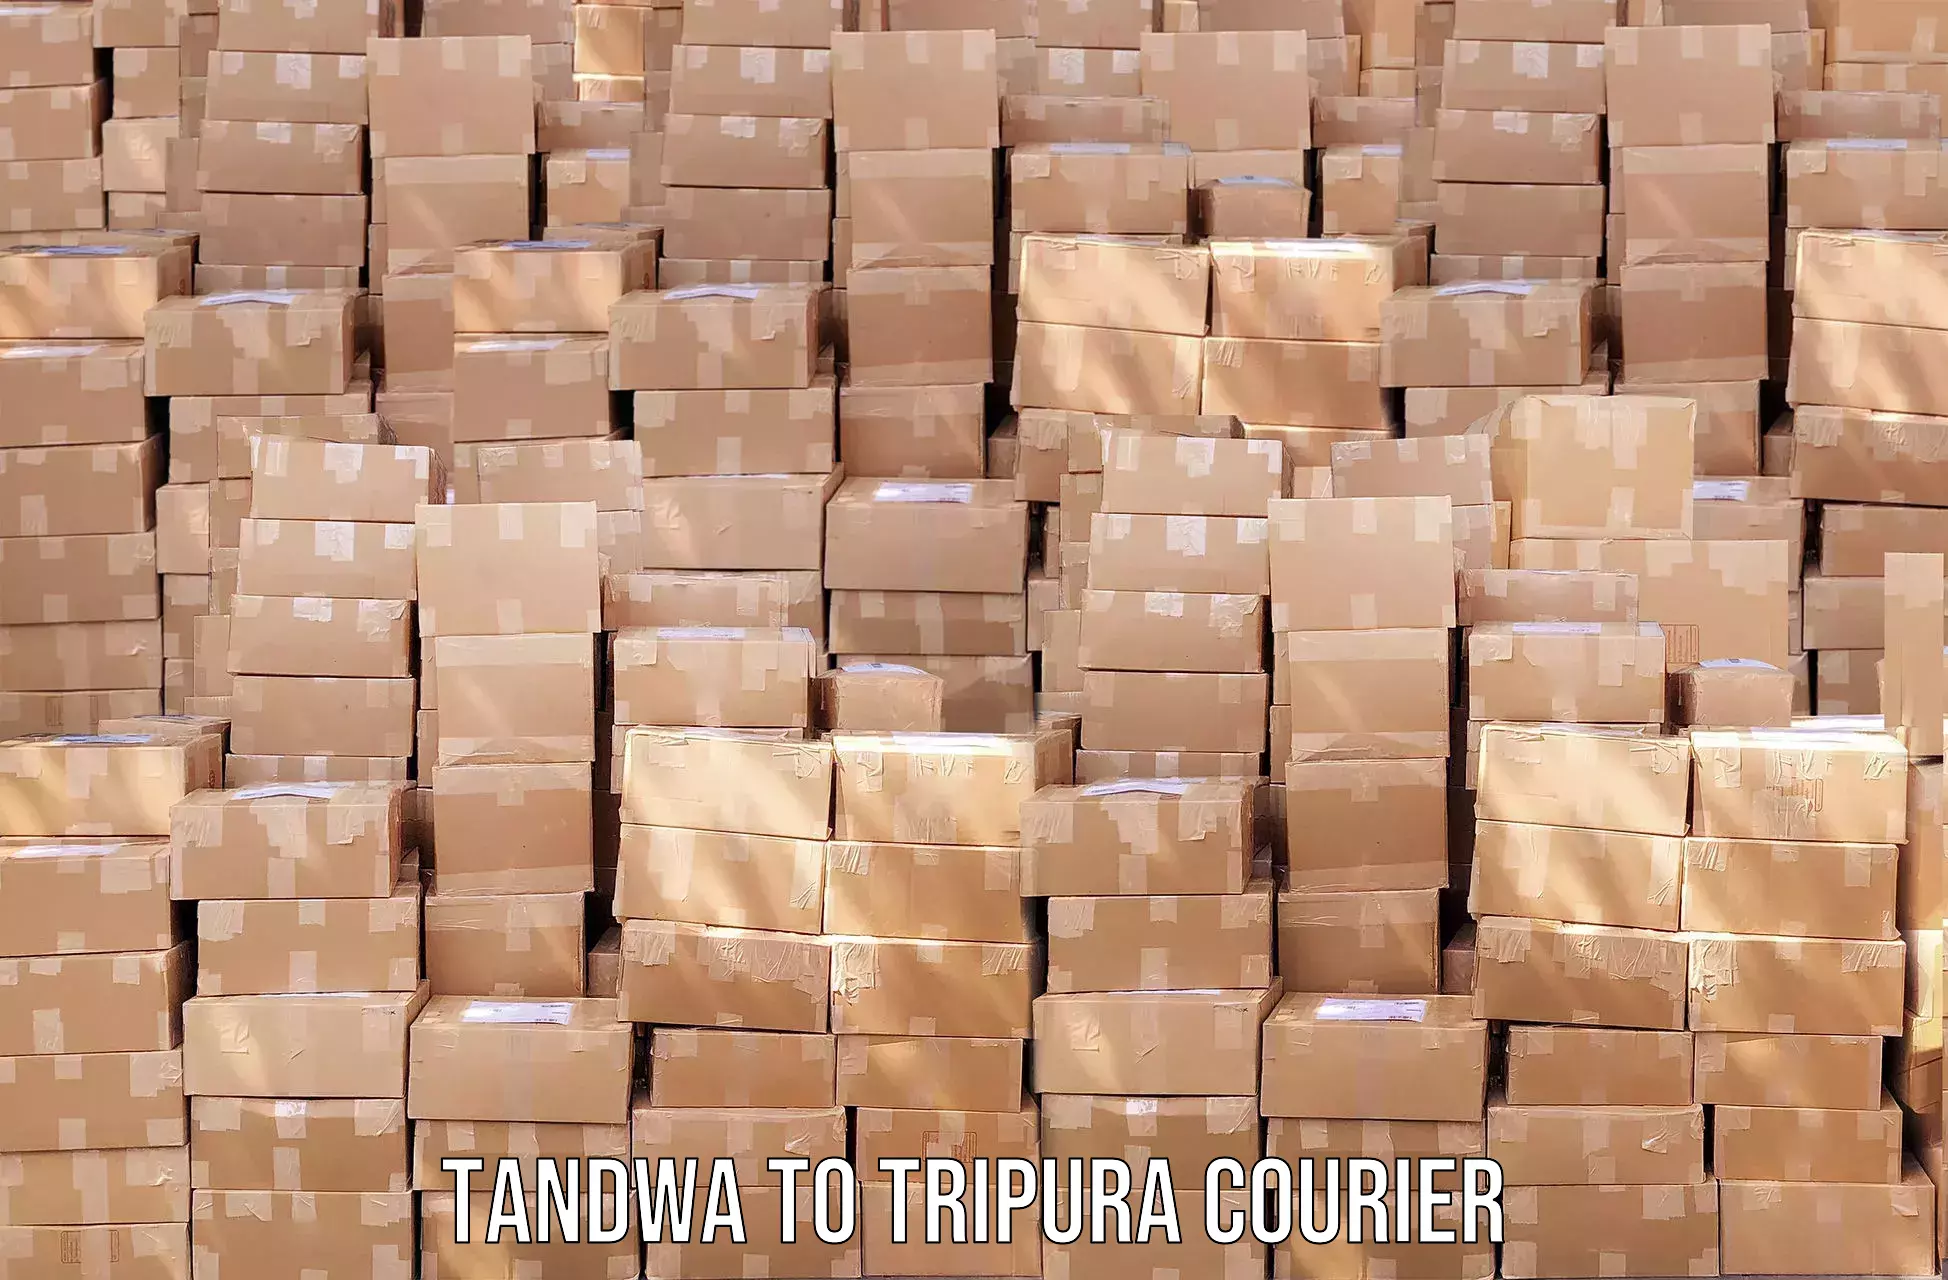 Courier service efficiency in Tandwa to Agartala